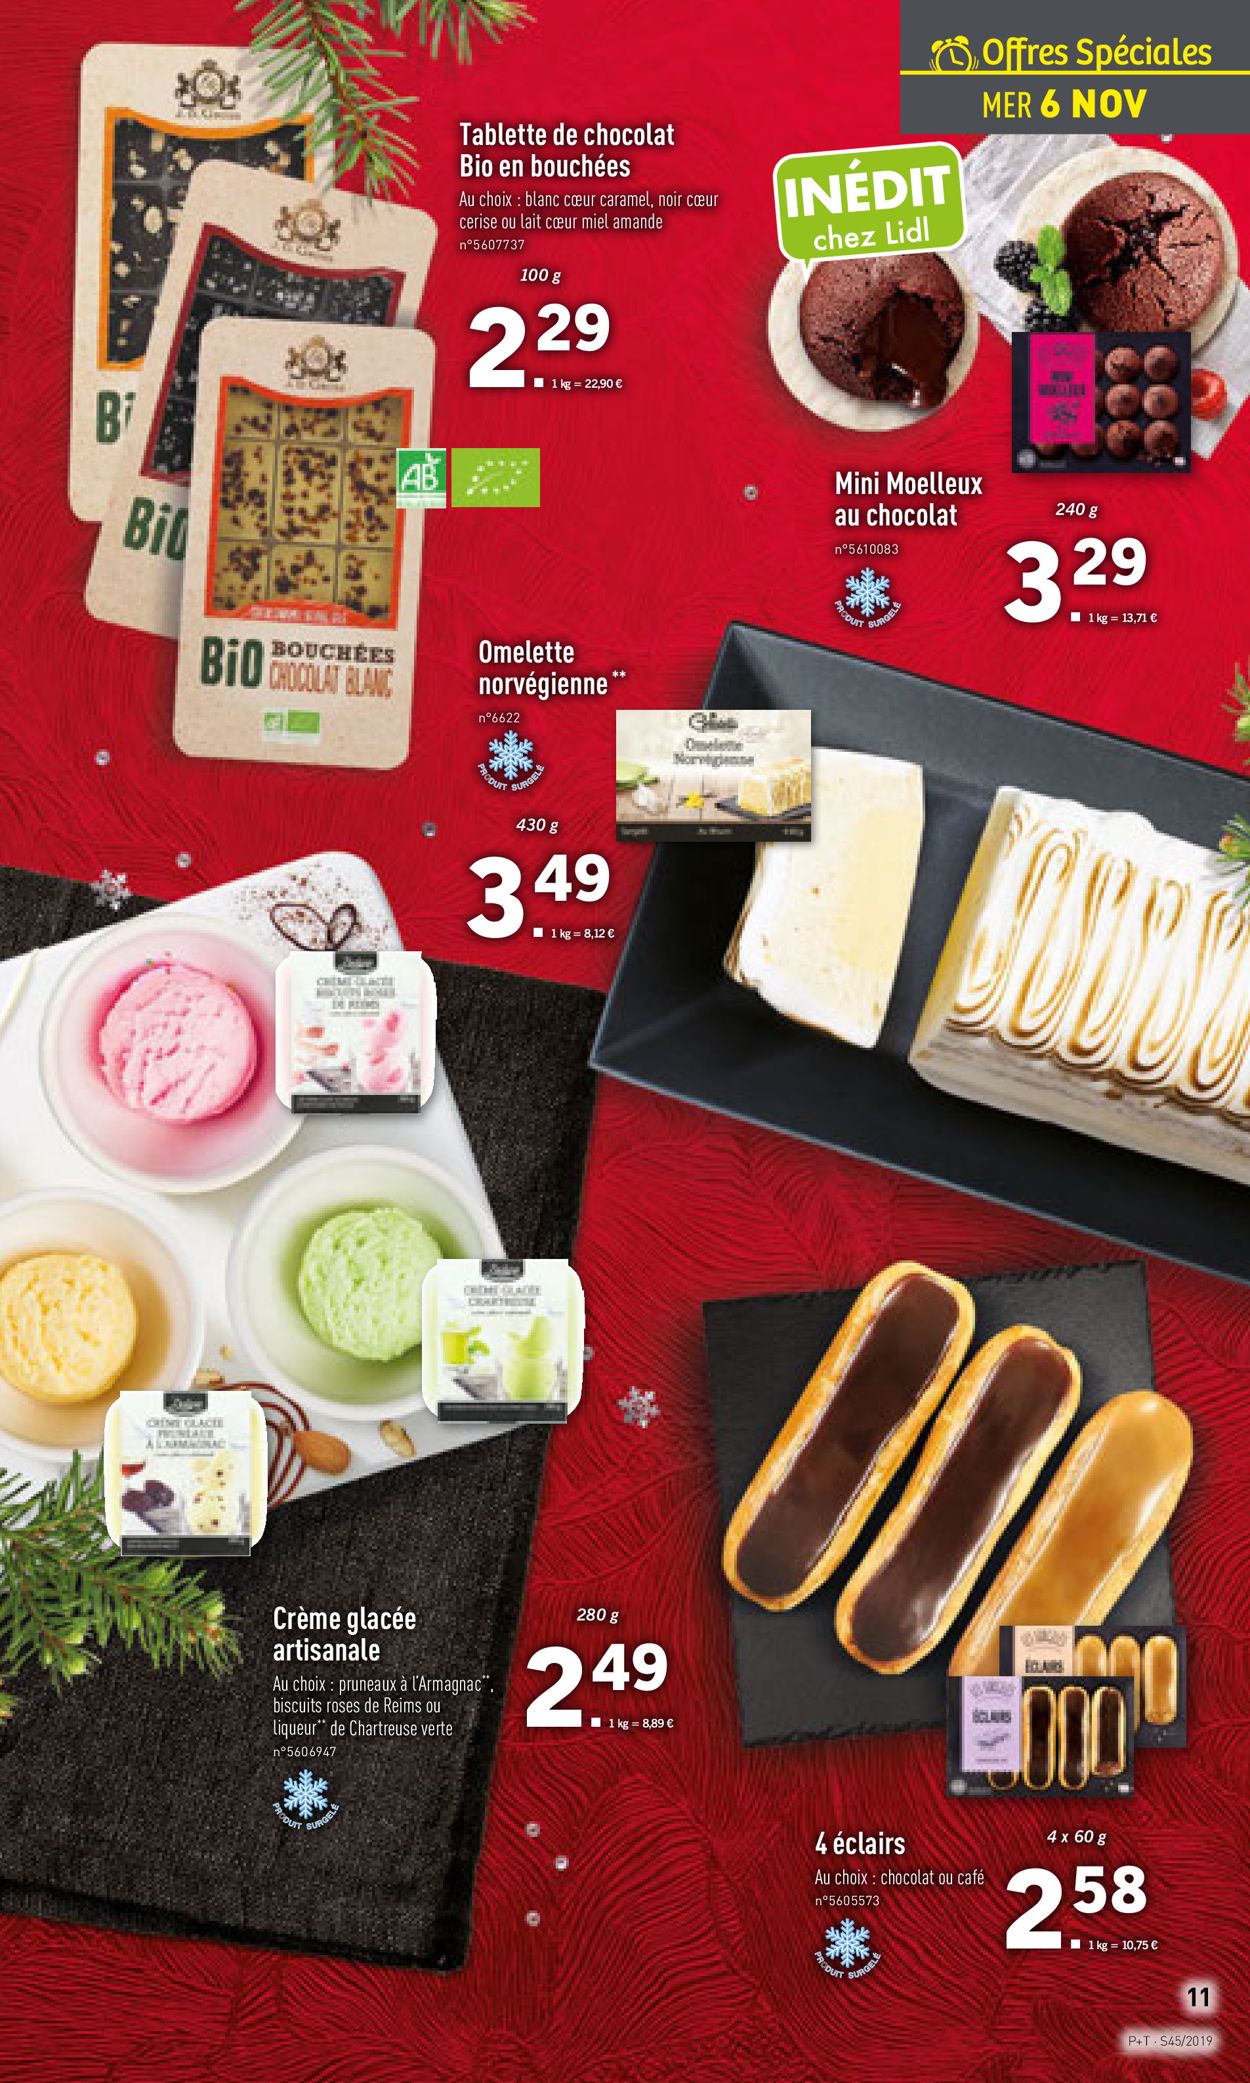 Lidl Catalogue - 06.11-12.11.2019 (Page 11)